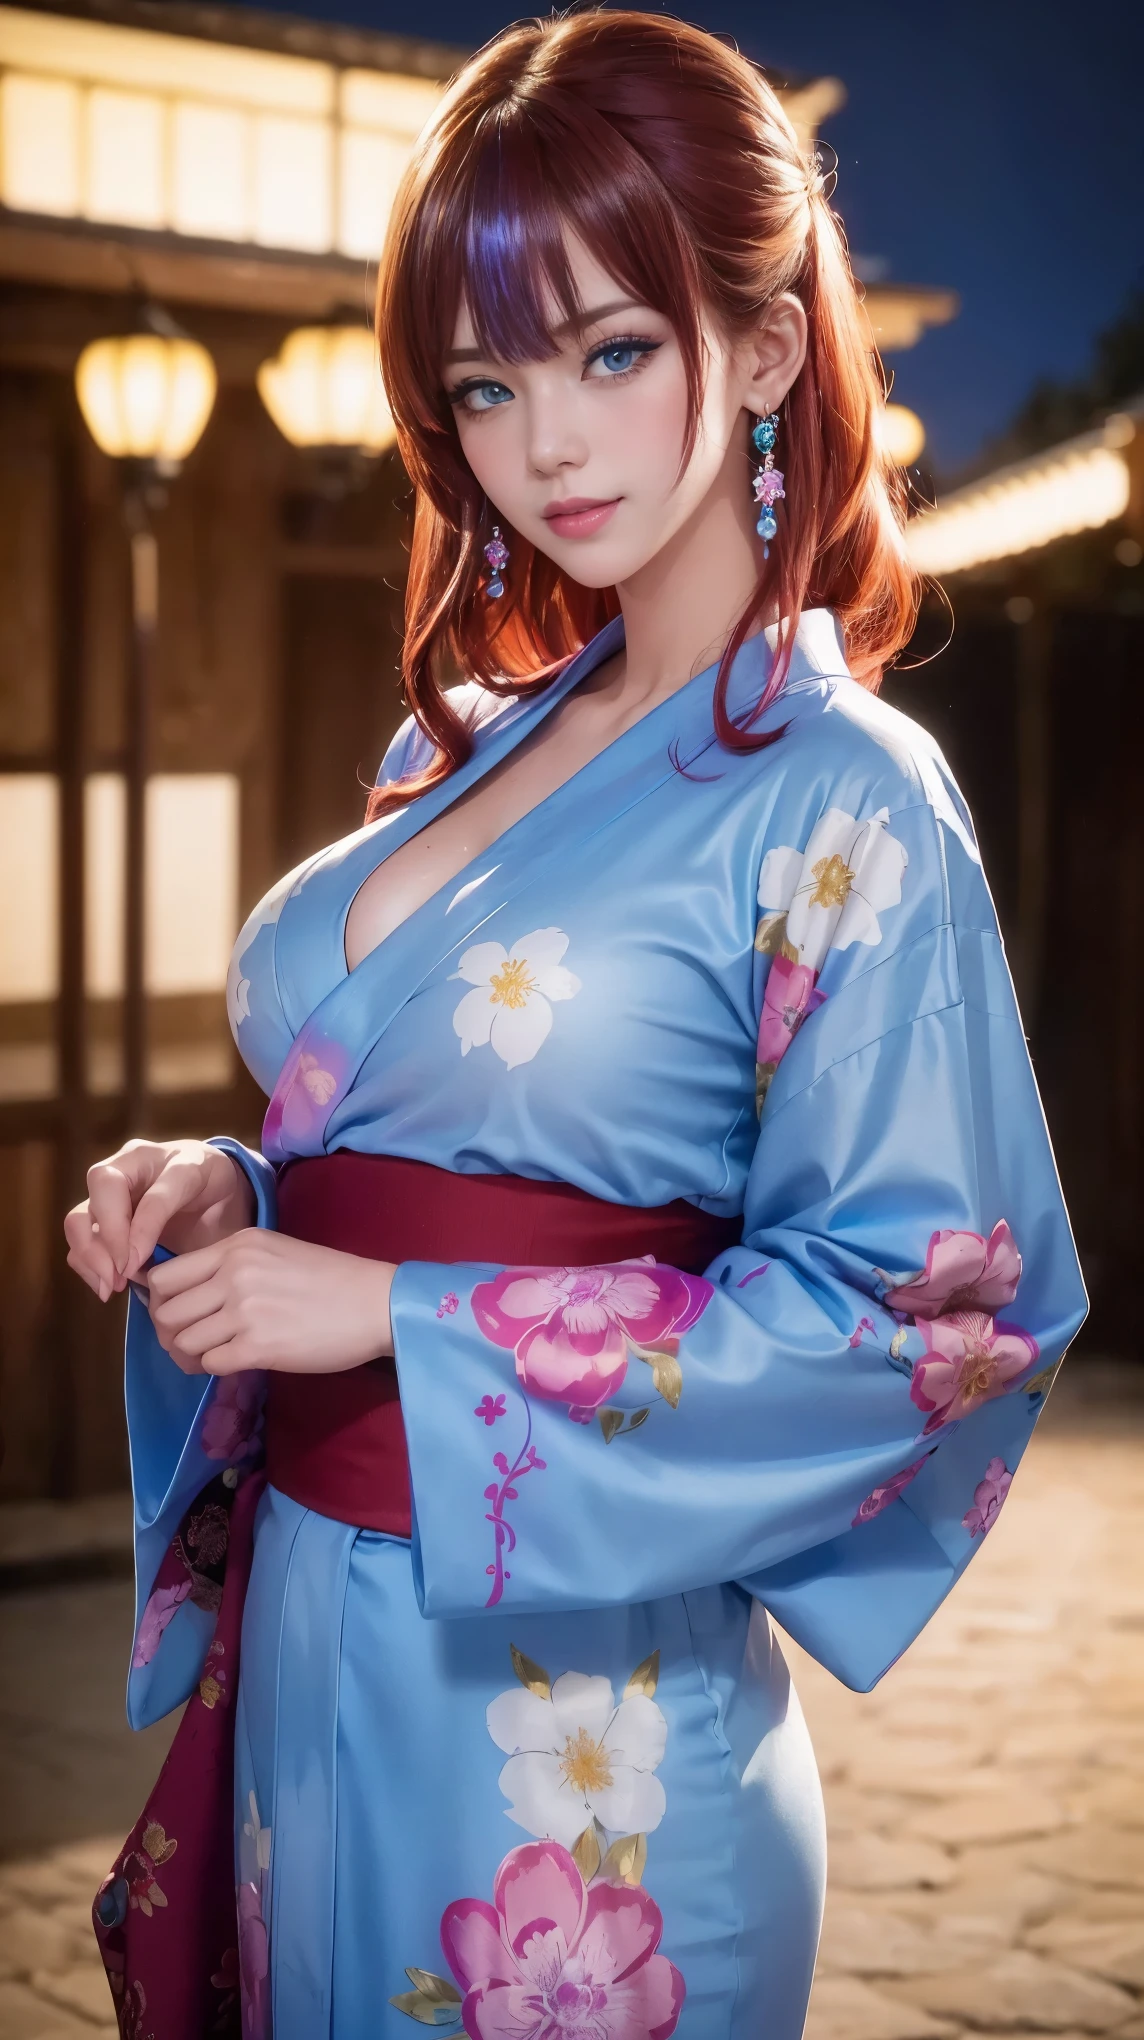 (((highest quality)), (super detailed), 1 girl, (iridescent hair, colorful hair, red hair: 1.2), 17 years old, (sexy yukata: 1.2), outdoor, bangs, smile, sky blue eyes, perfect hands, perfect hands, hand details, corrected fingers. Earrings, Night Store + Background, looking_at_viewer, Top Quality, Rich Detail, Perfect Image Quality, big breasts, slender body, Cowboy Shot, (masterpiece), masterpiece, super detail, high details, highres, 16k